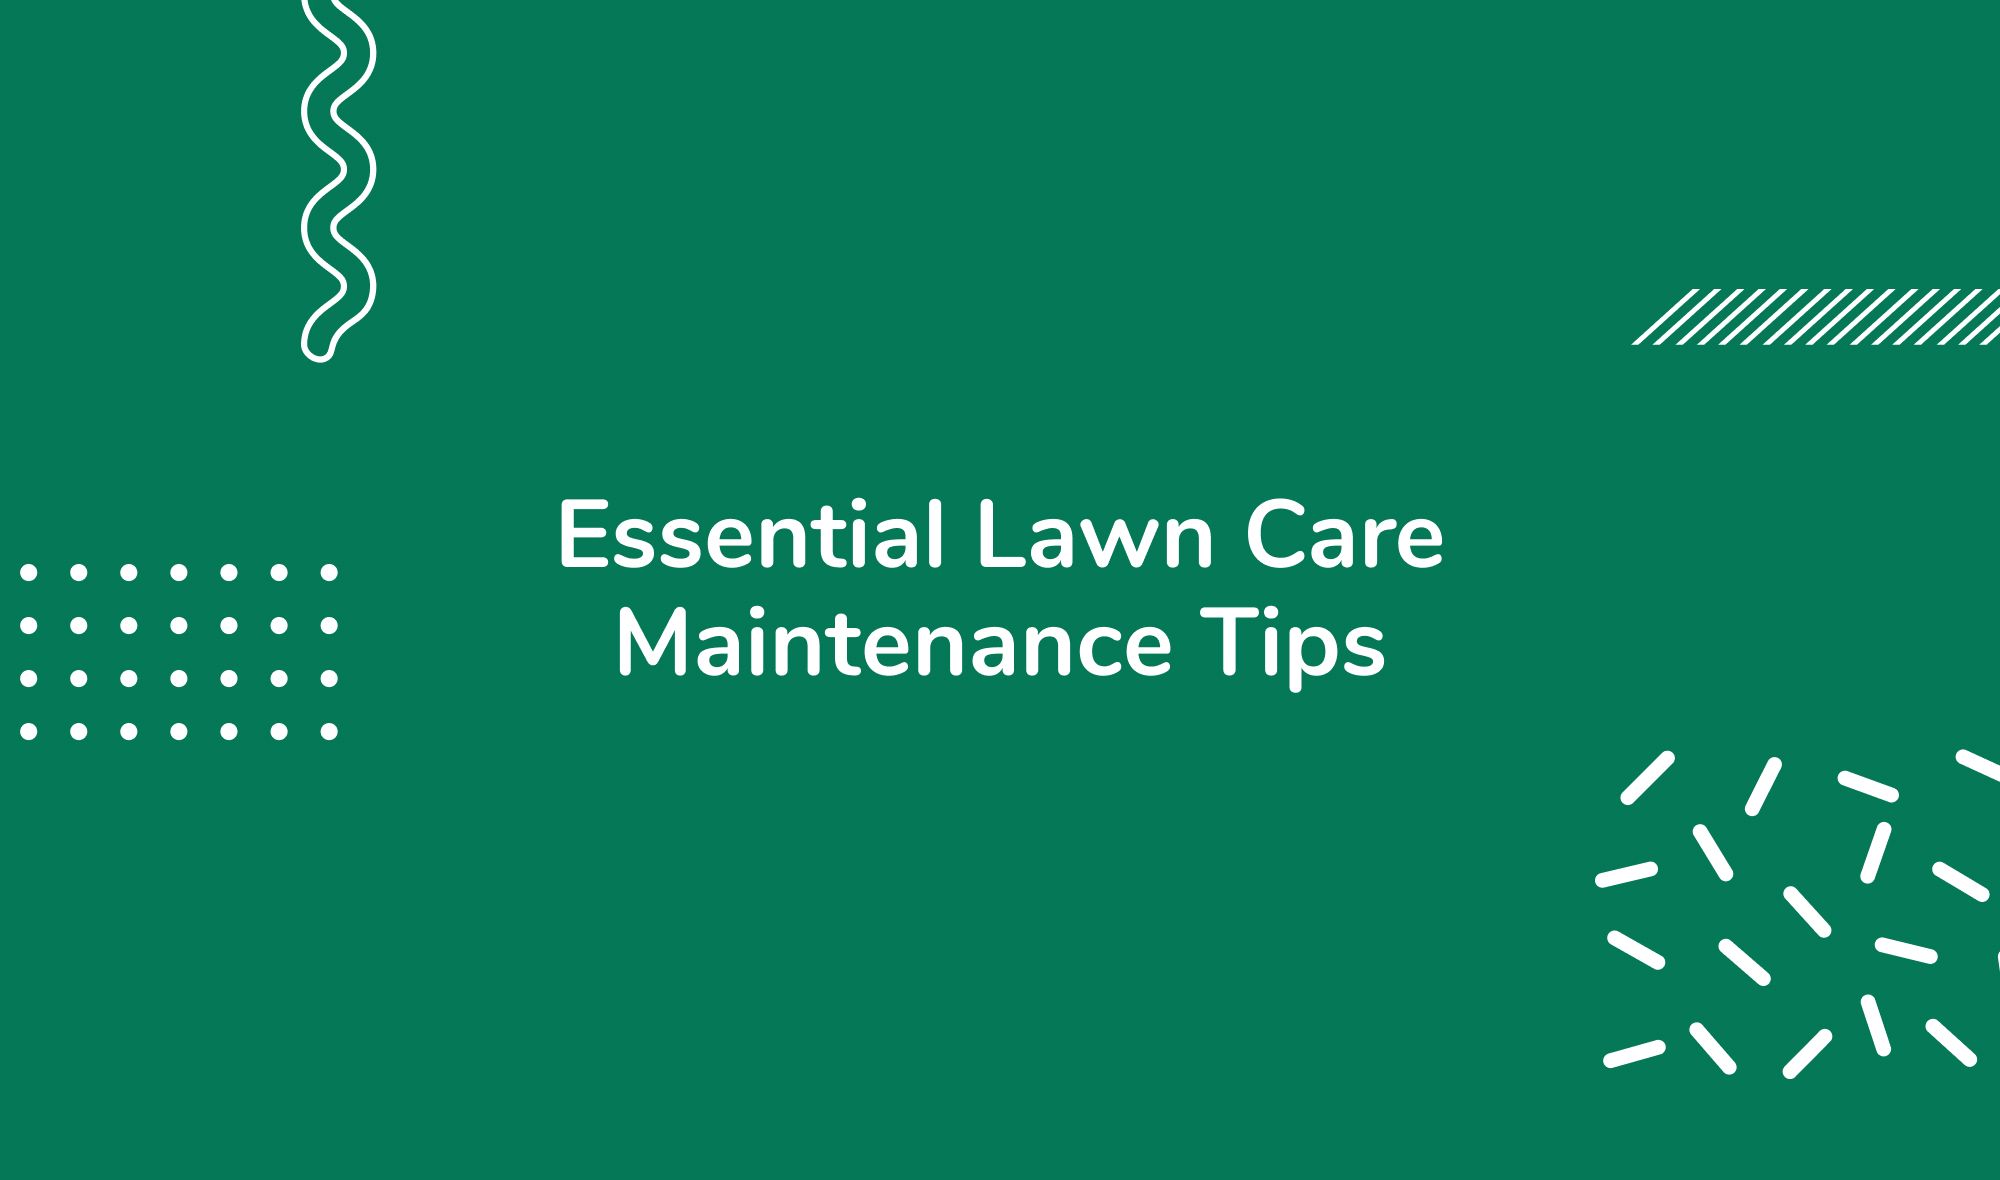 Essential Lawn Care Maintenance Tips